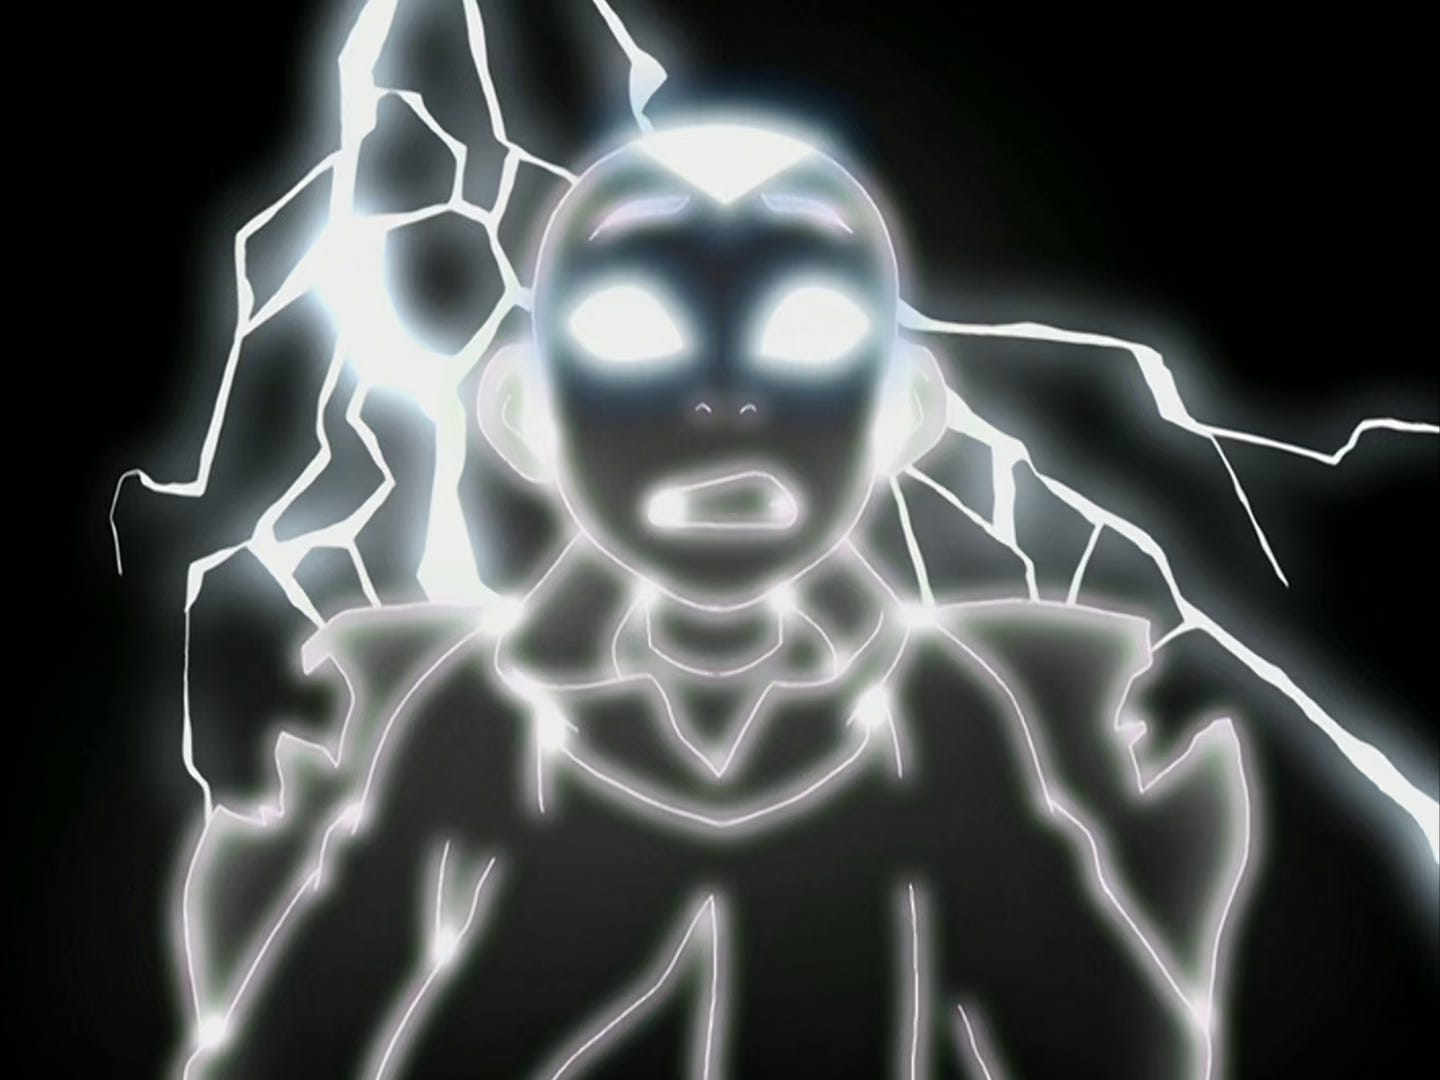 Aang's body is lit up by lightning, his face surprised, as Azula shoots him in the back.